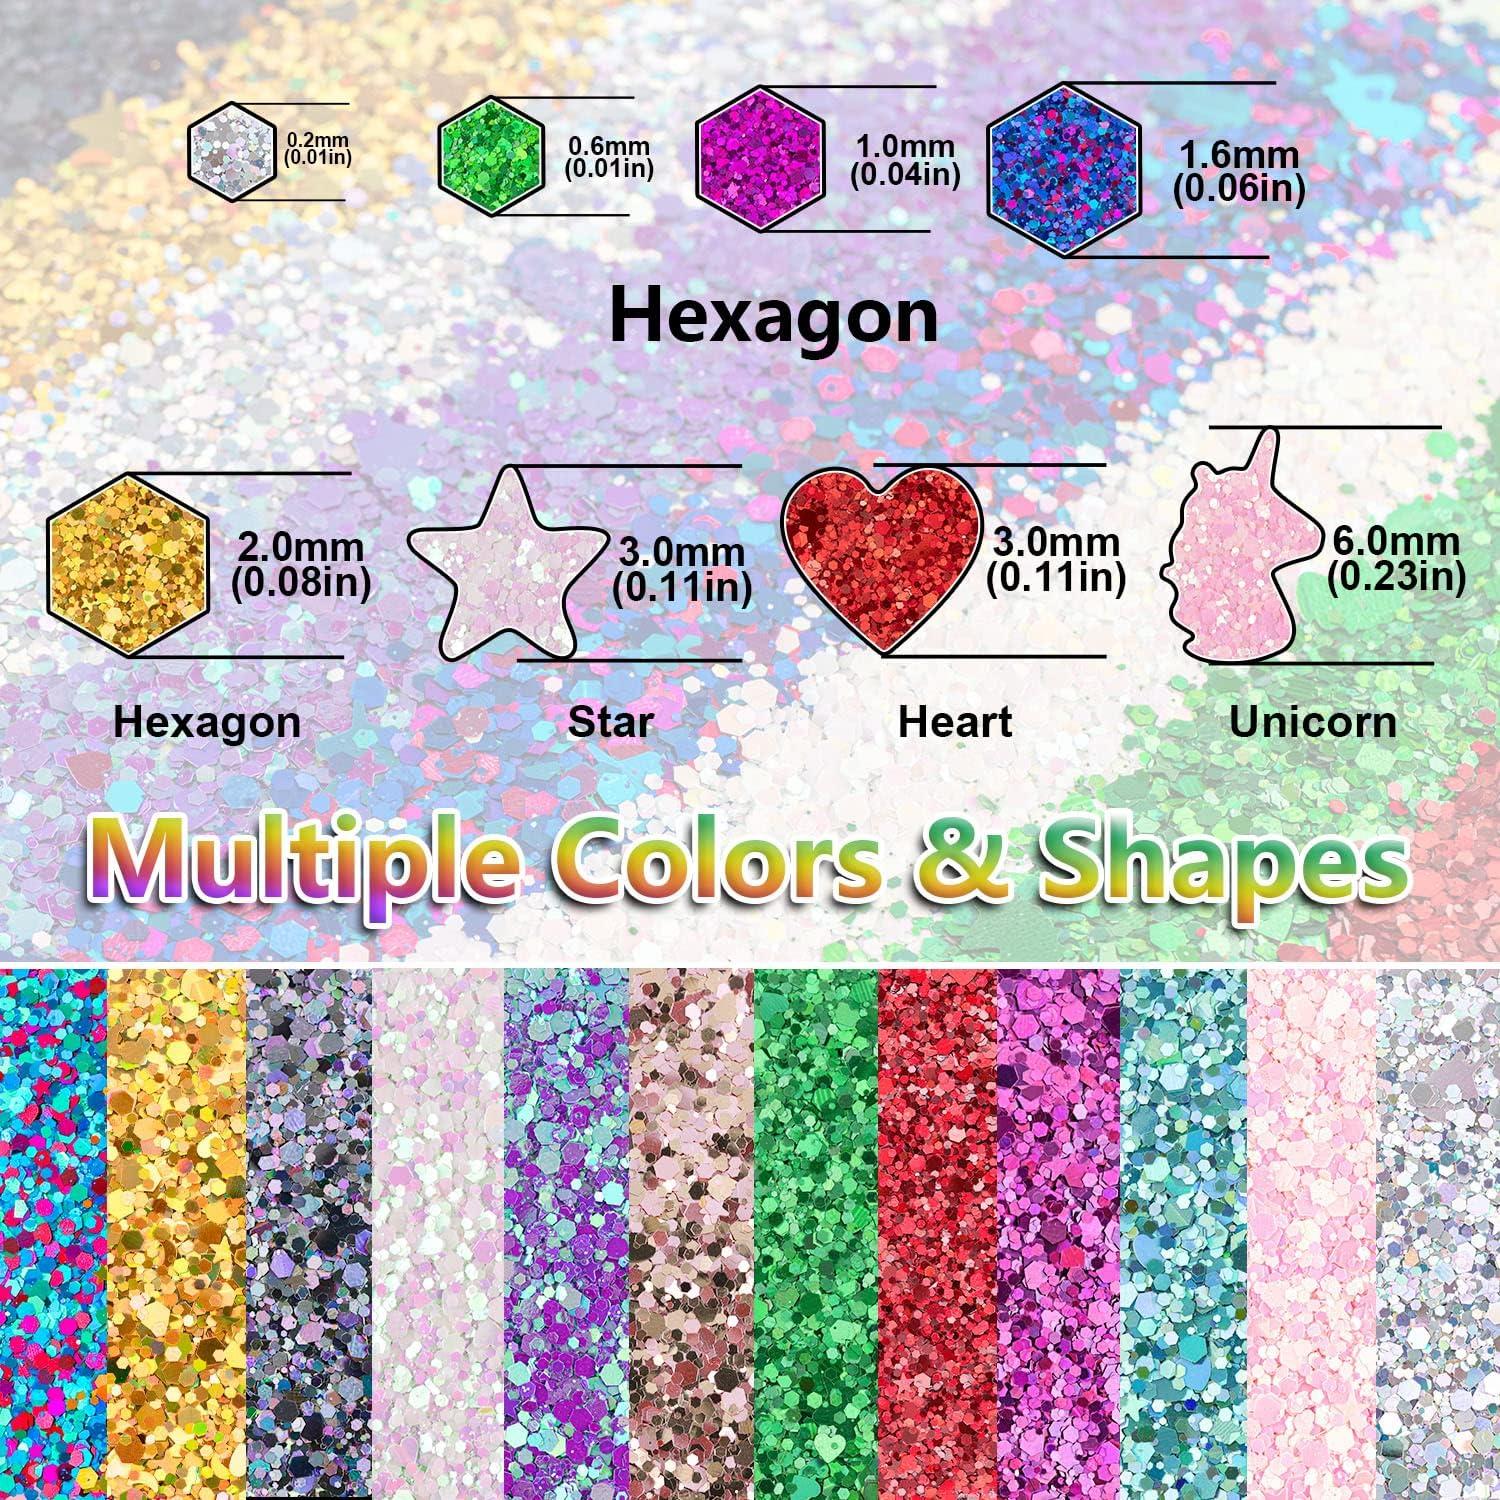 12 Packs: 12 ct. (144 total) Shaped Glitter Pack by Creatology™ 